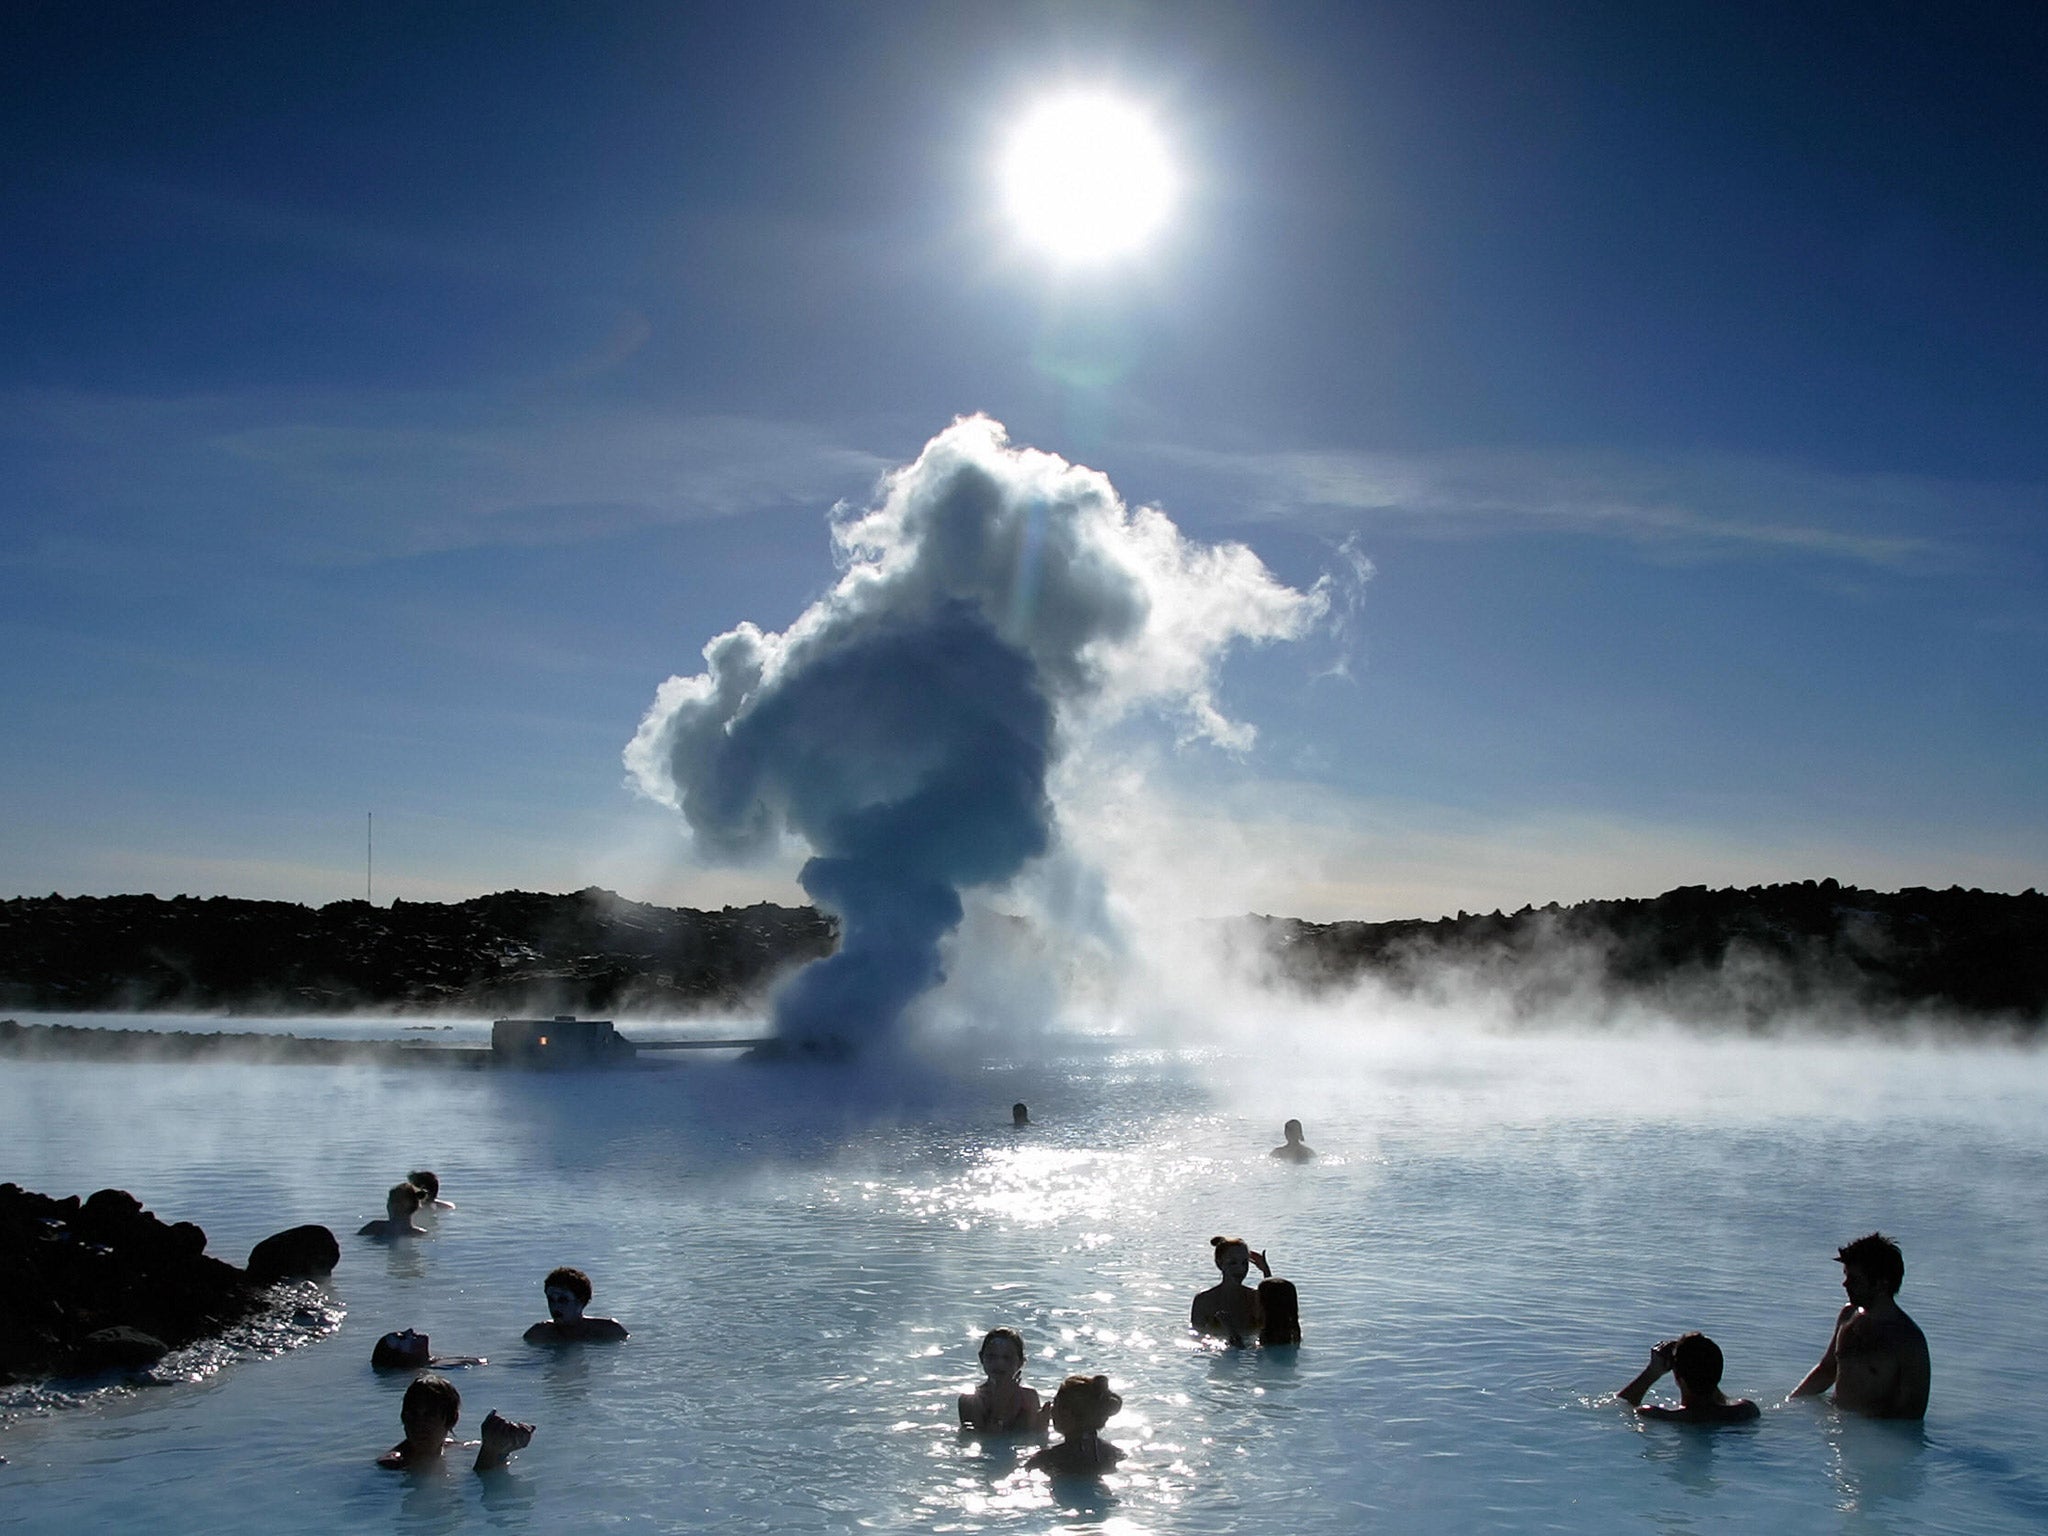 Iceland receives 95% of its electricity from geothermal energy